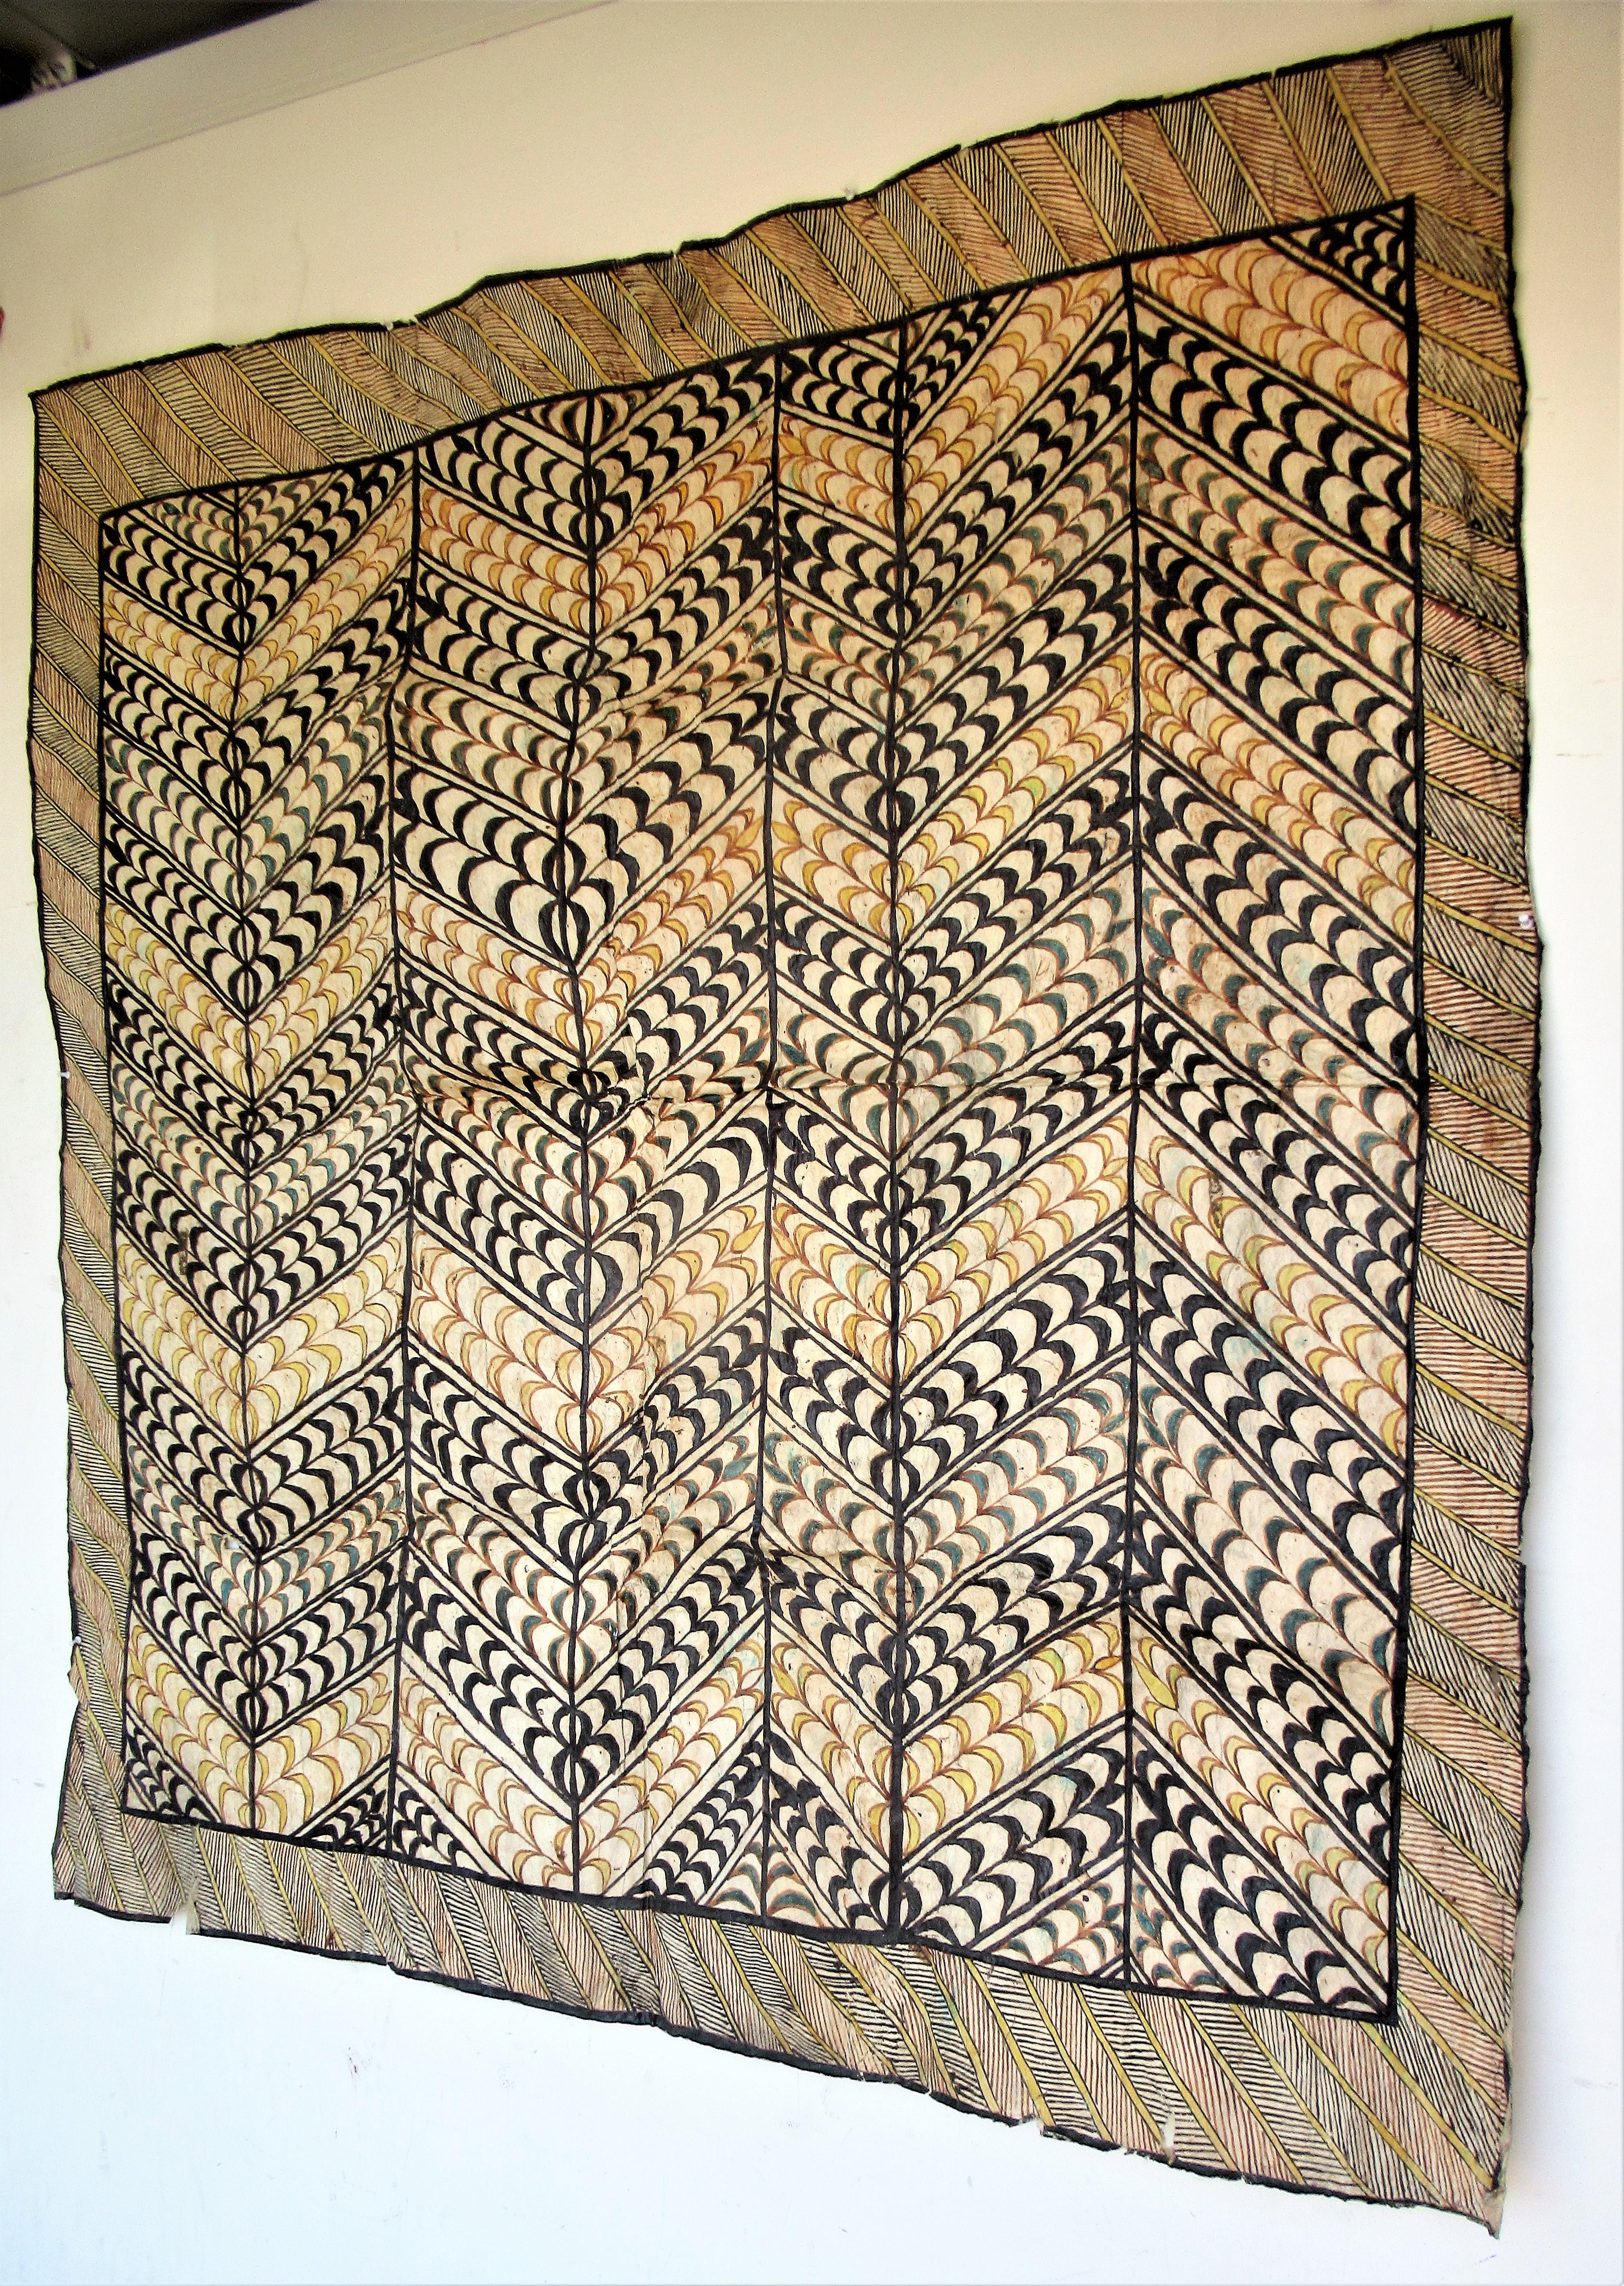 Antique natural fiber Tapa cloth with an exceptionally fine detailed design of hand painted beautifully aged vegetable pigment colors. This was handed down in the family of and first collected by William L. Buchanan ( 1852 - 1909 ) Diplomat of the